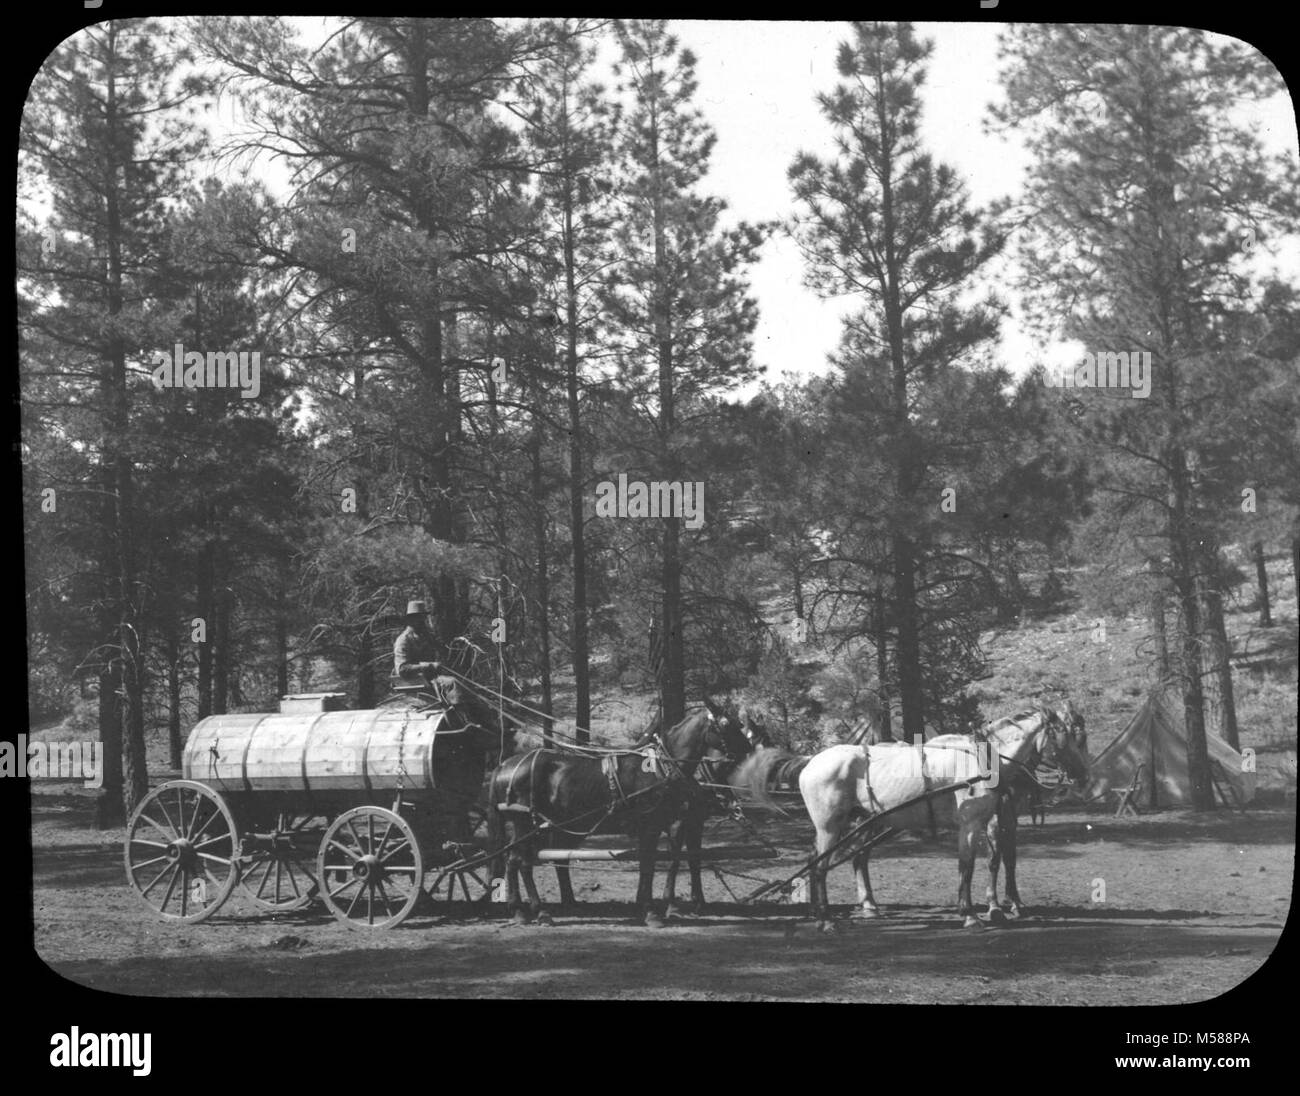 Grand Canyon Matthes Survey of  Water Wagon. FOUR HORSES PULLING WATER WAGON WITH MAN STEERING.  IN PONDEROSA FOREST.  CAMPING TENT ON RIGHT.  OLD CATALOG CARD SAYS IT IS AT GRAND CANYON. CIRCA 1902. PROBABLY HANCE CAMP AREA. WITH A GROUP OF SLIDES FROM THE MATTHES SURVEY EXPEDITION IN THE GRAND CANYON - CIRCA 1902 Stock Photo